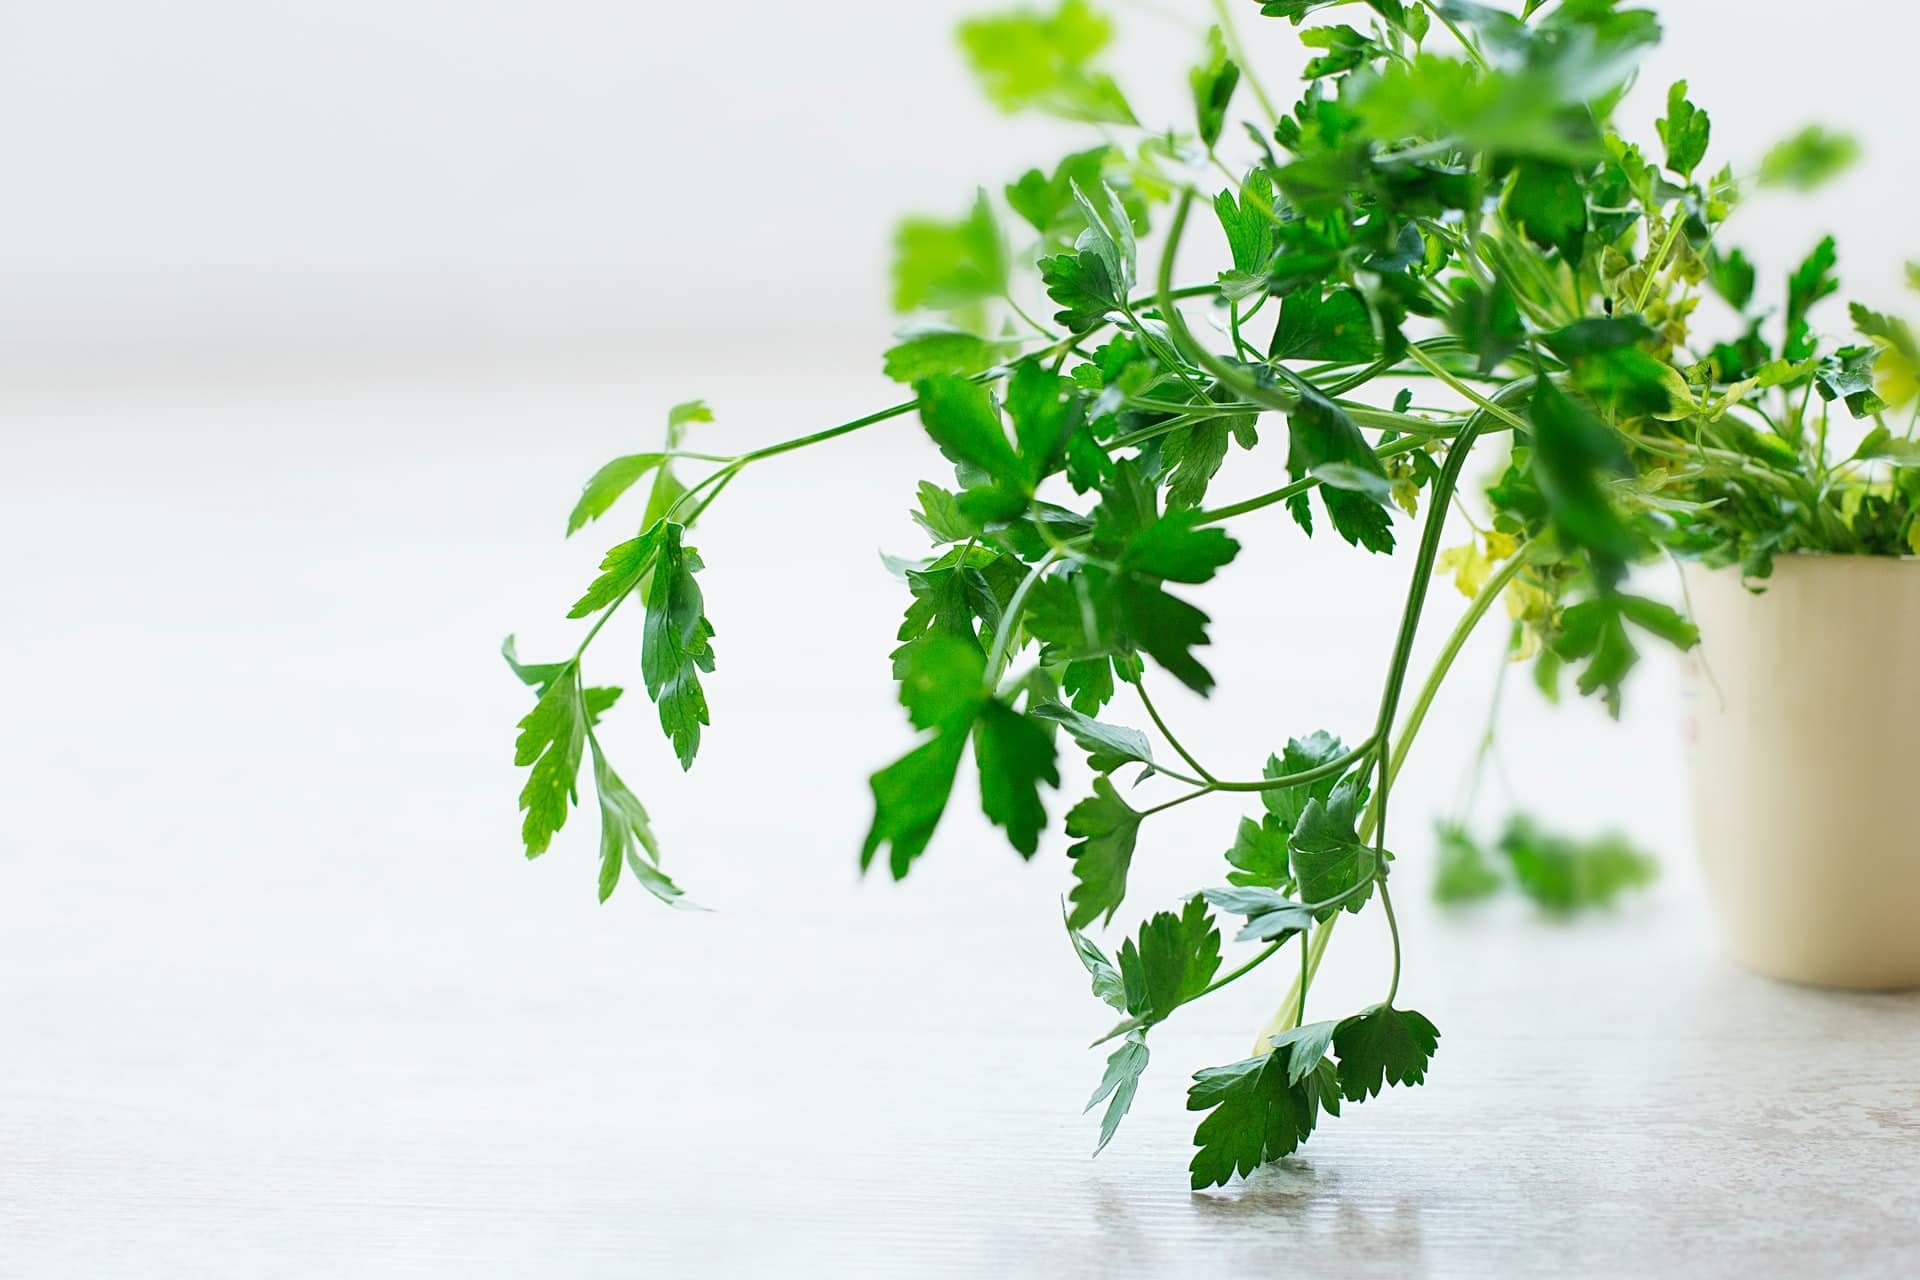 How to Harvest Parsley